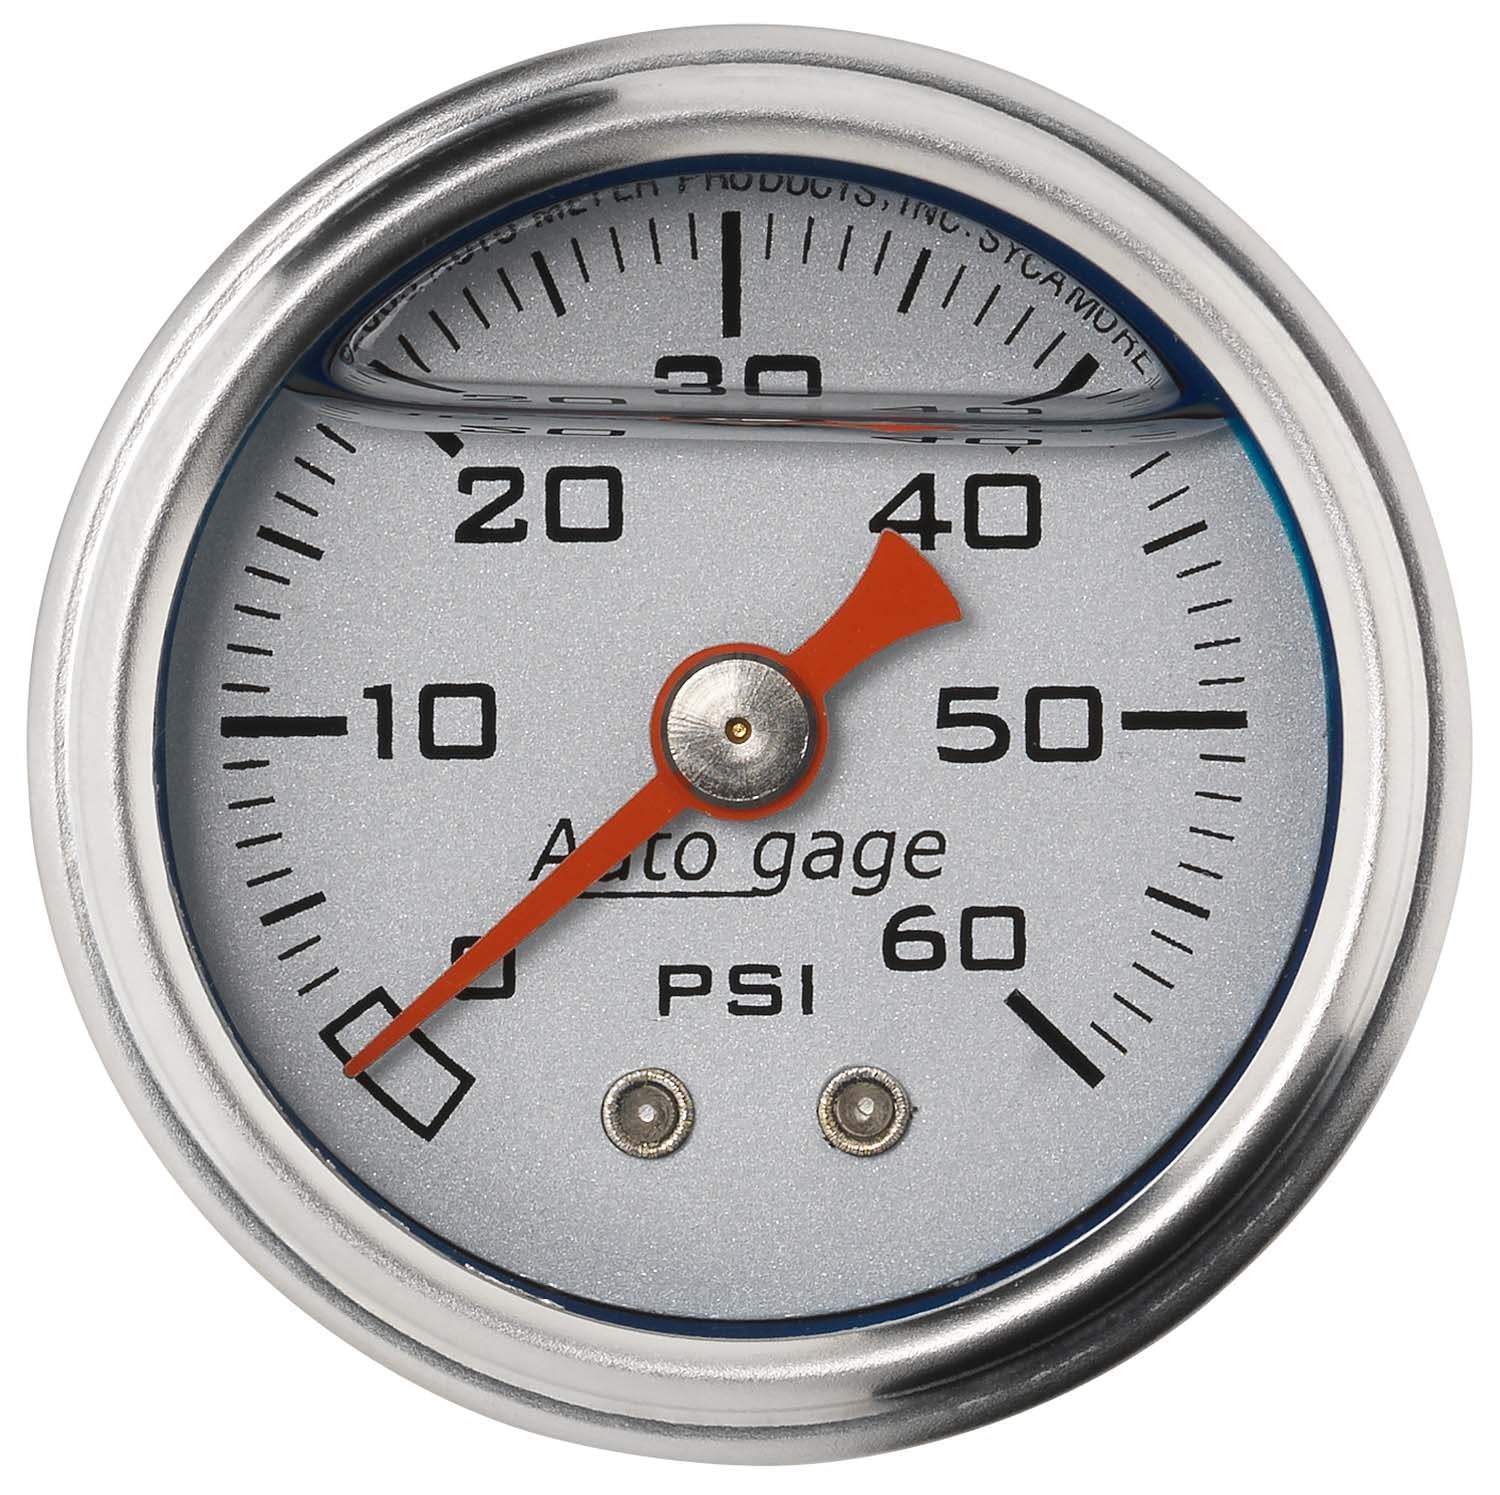 AutoMeter Products 2179 Auto Gage Series Dampened-Movement Pressure Gauge (Silver, 0-60 PSI, 1-1/2 in.)